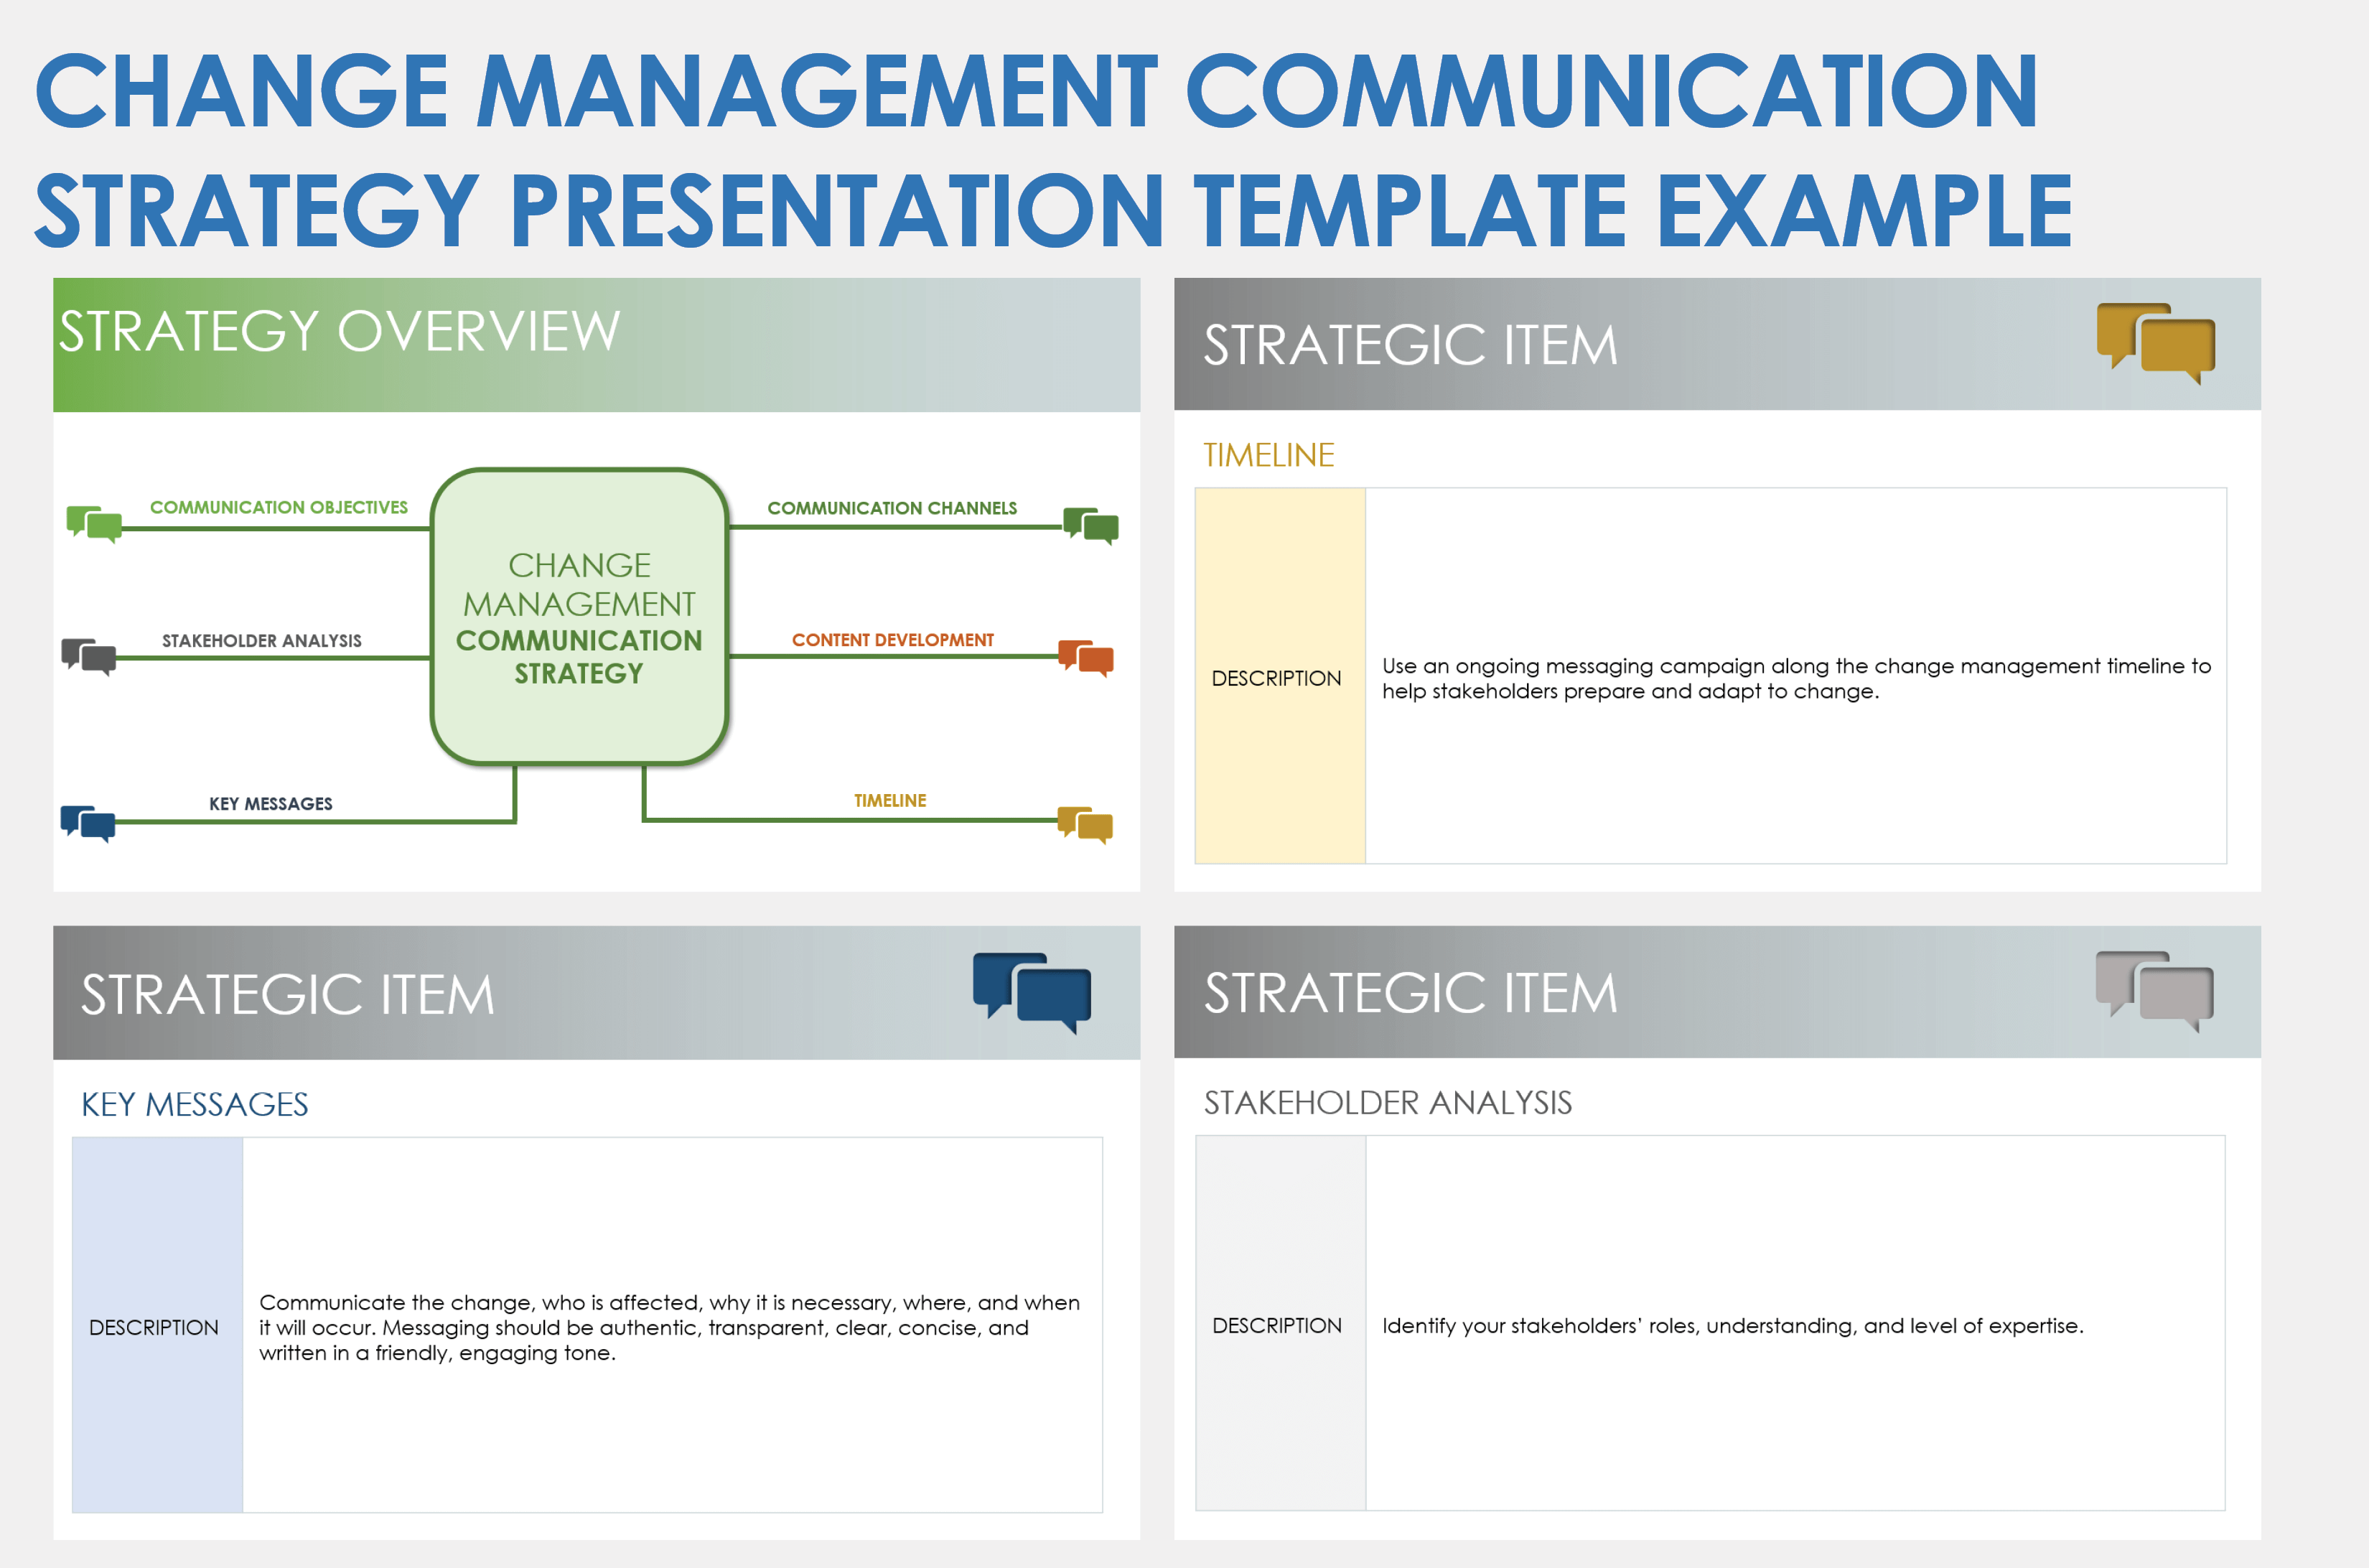 Change Management Communication Strategy Presentation Example Template